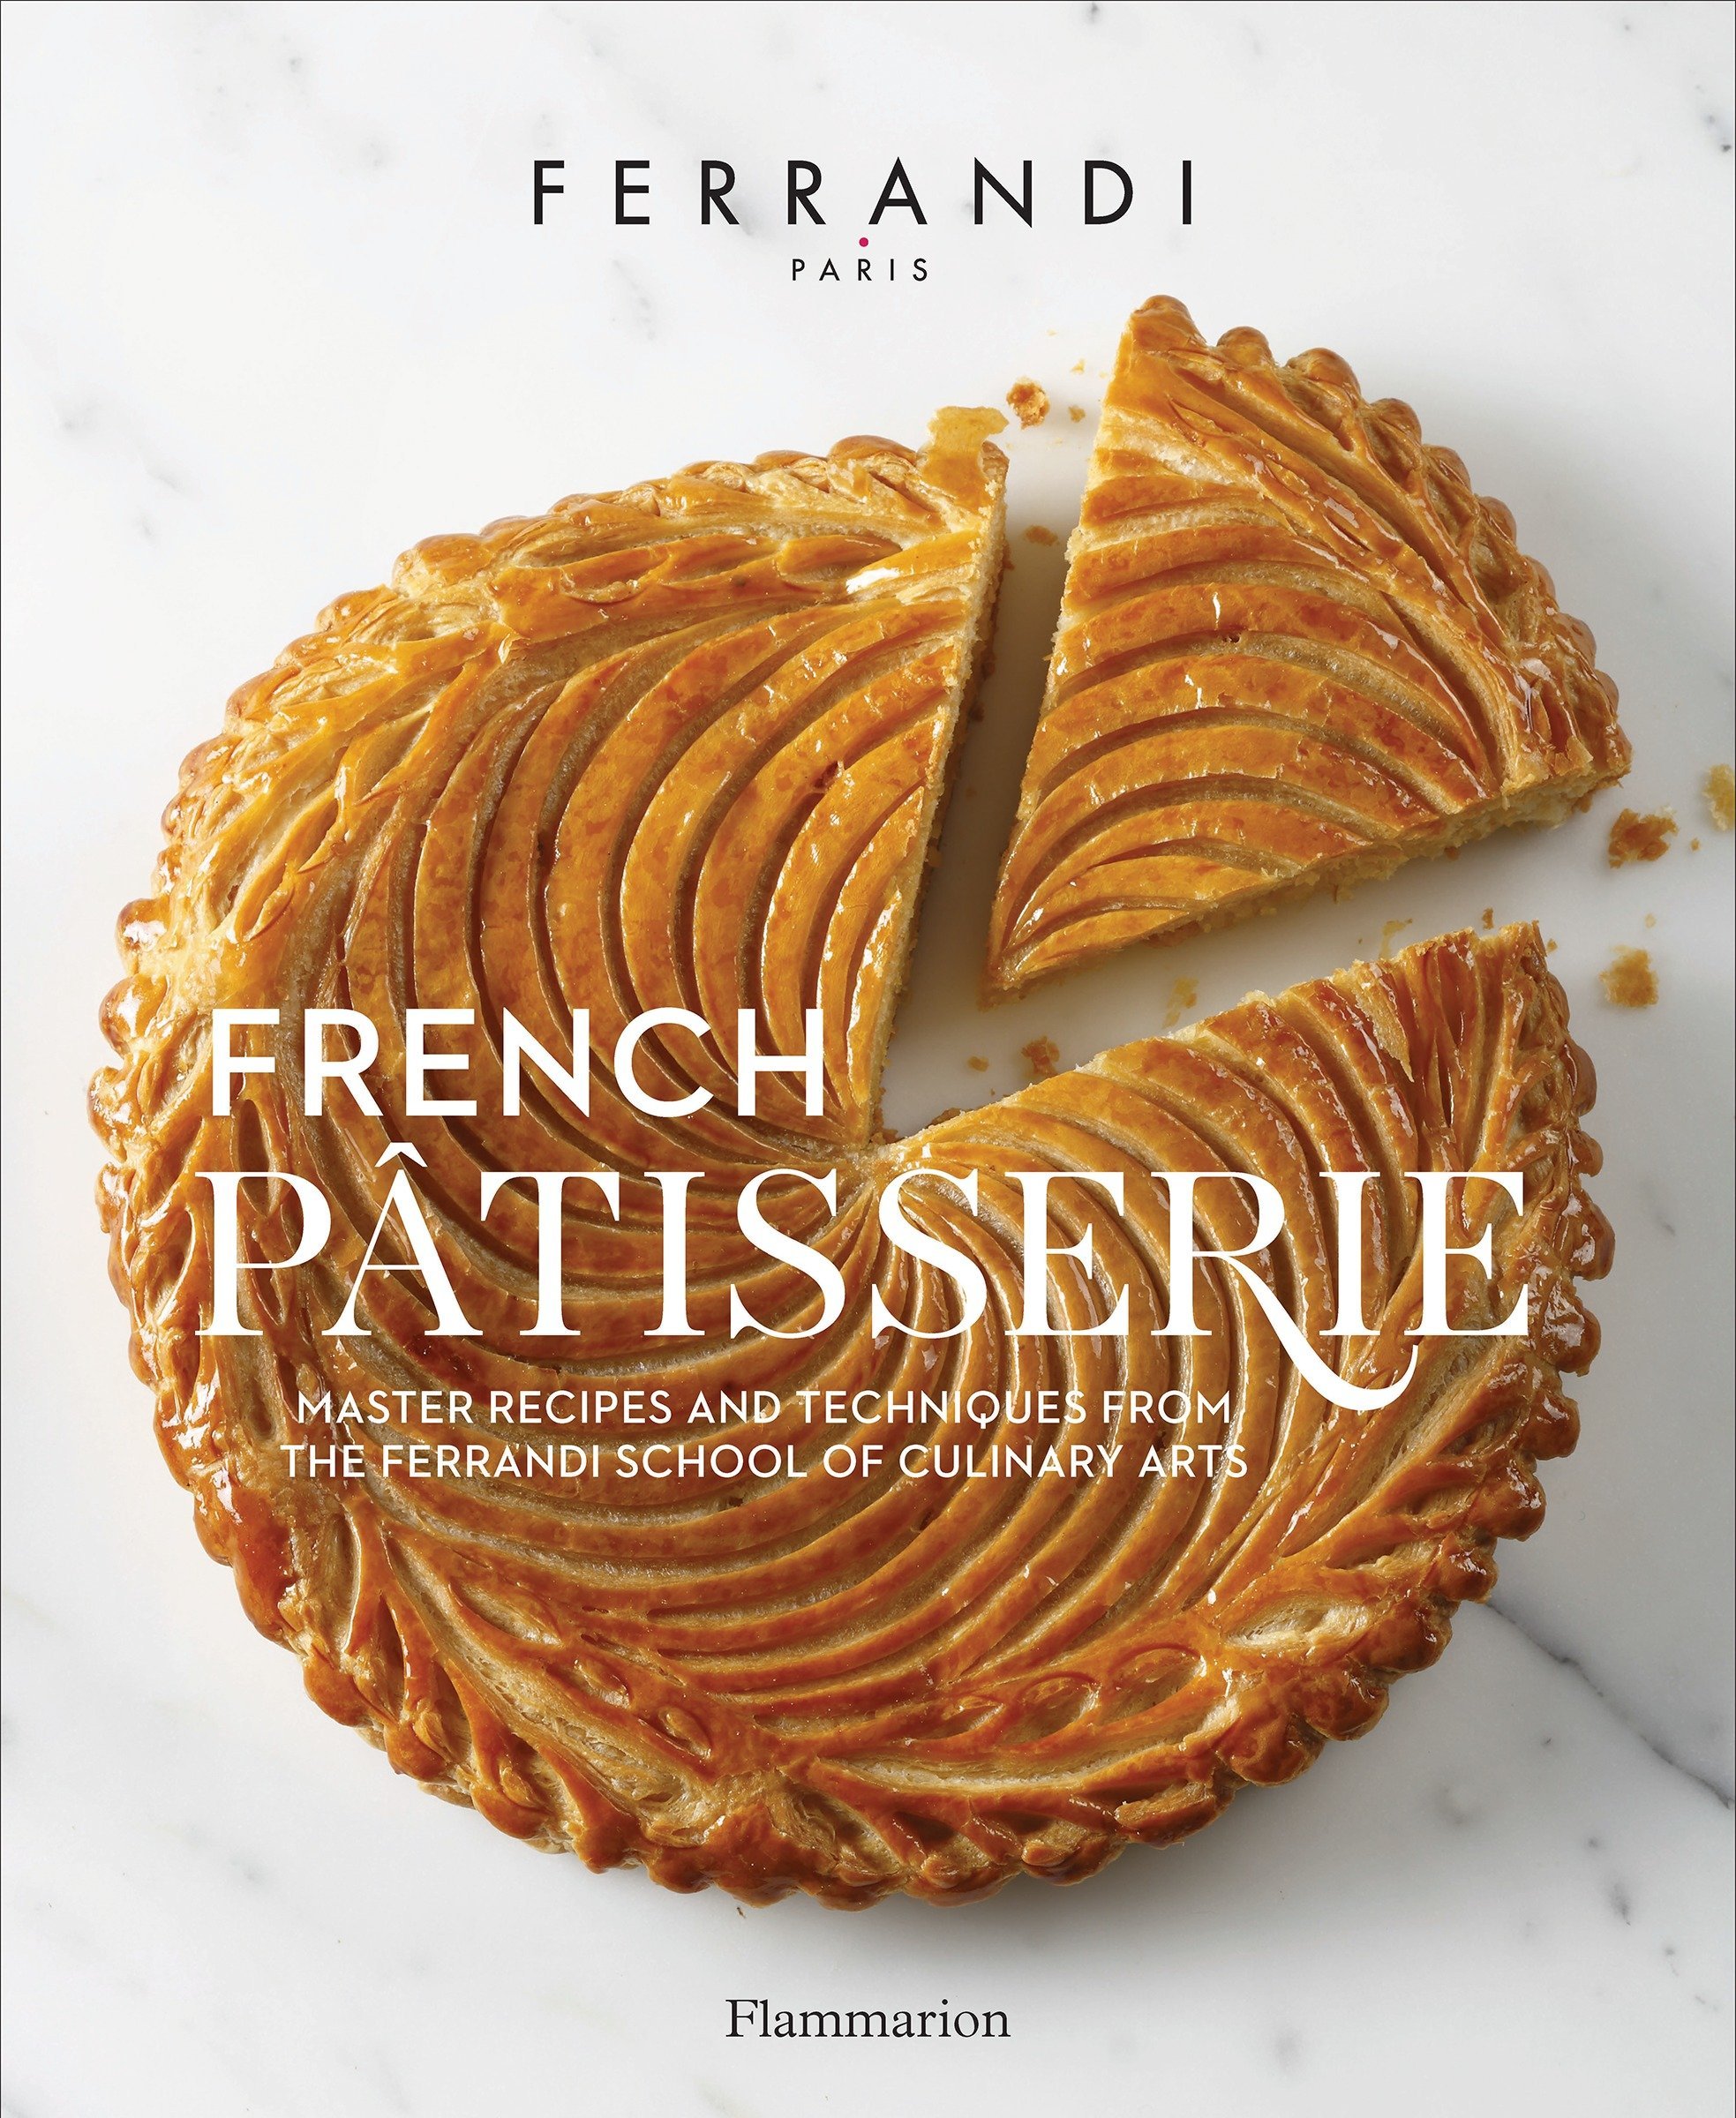 French patisserie master recipes and techniques from the ferrandi school of culinary Arts